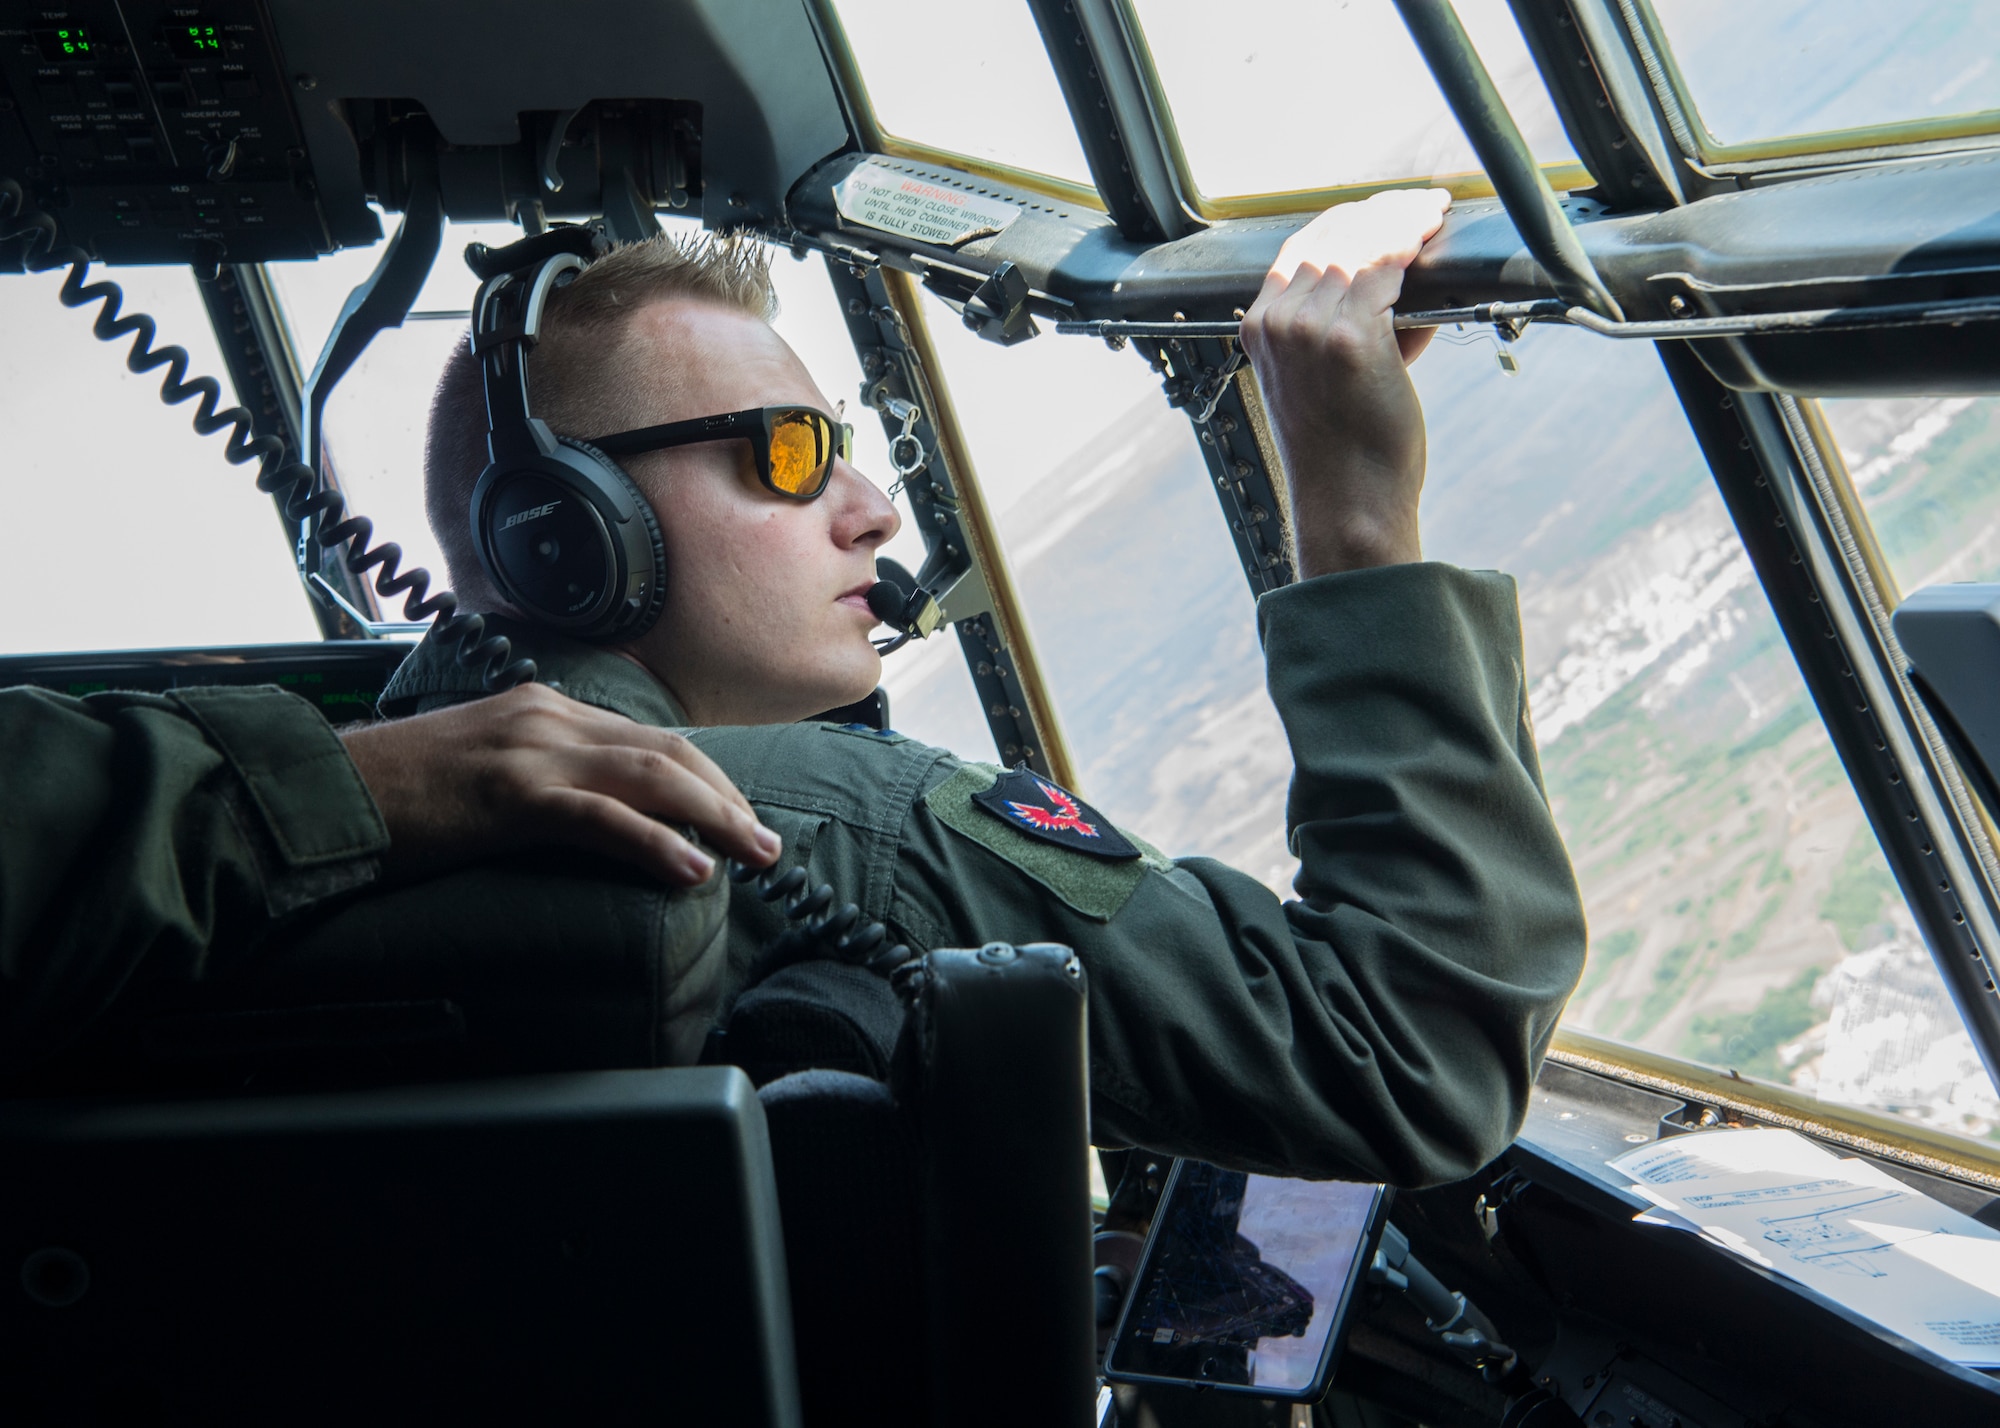 U.S. Air Force Capt. Dan Hill, 37th Airlift Squadron C-130J Super Hercules pilot, looks out his window while copilot over Romania, Aug. 21, 2019. Romanian and U.S. Air Force members participated in exercise Carpathian Fall 2019 allowing U.S. military members stationed at Ramstein Air Base, Germany, the opportunity to attain certifications and training that isn’t otherwise possible in Germany. (U.S. Air Force photo by Staff Sgt. Kirby Turbak)